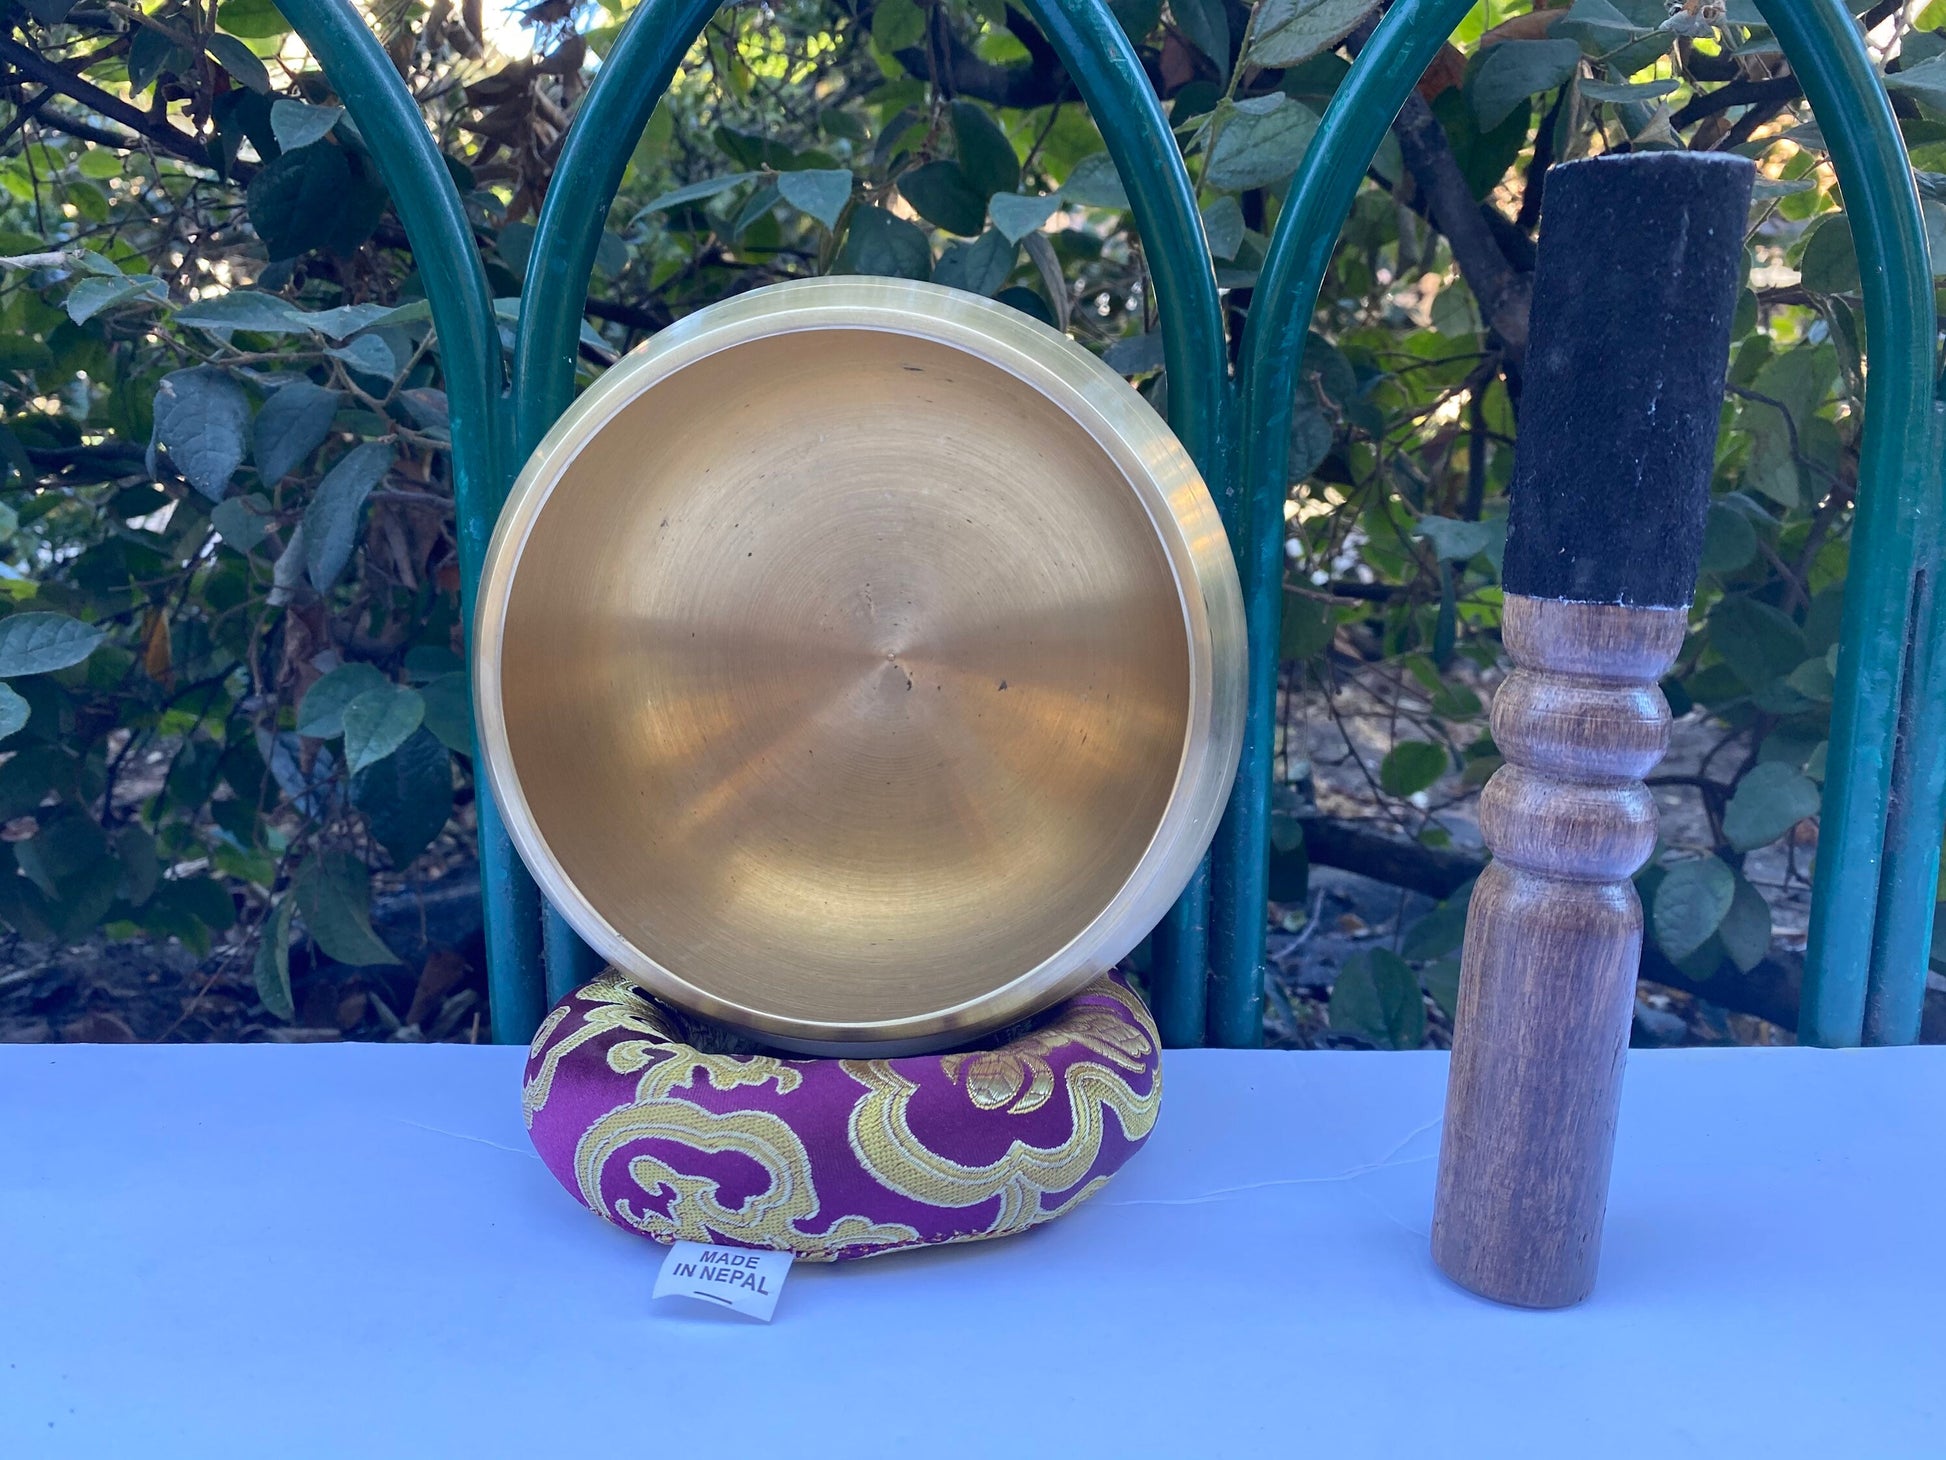 Tibetan 5" Singing bowl with high quality Sound for yoga, Meditation and Sound Therapy. Hurry up!!!!